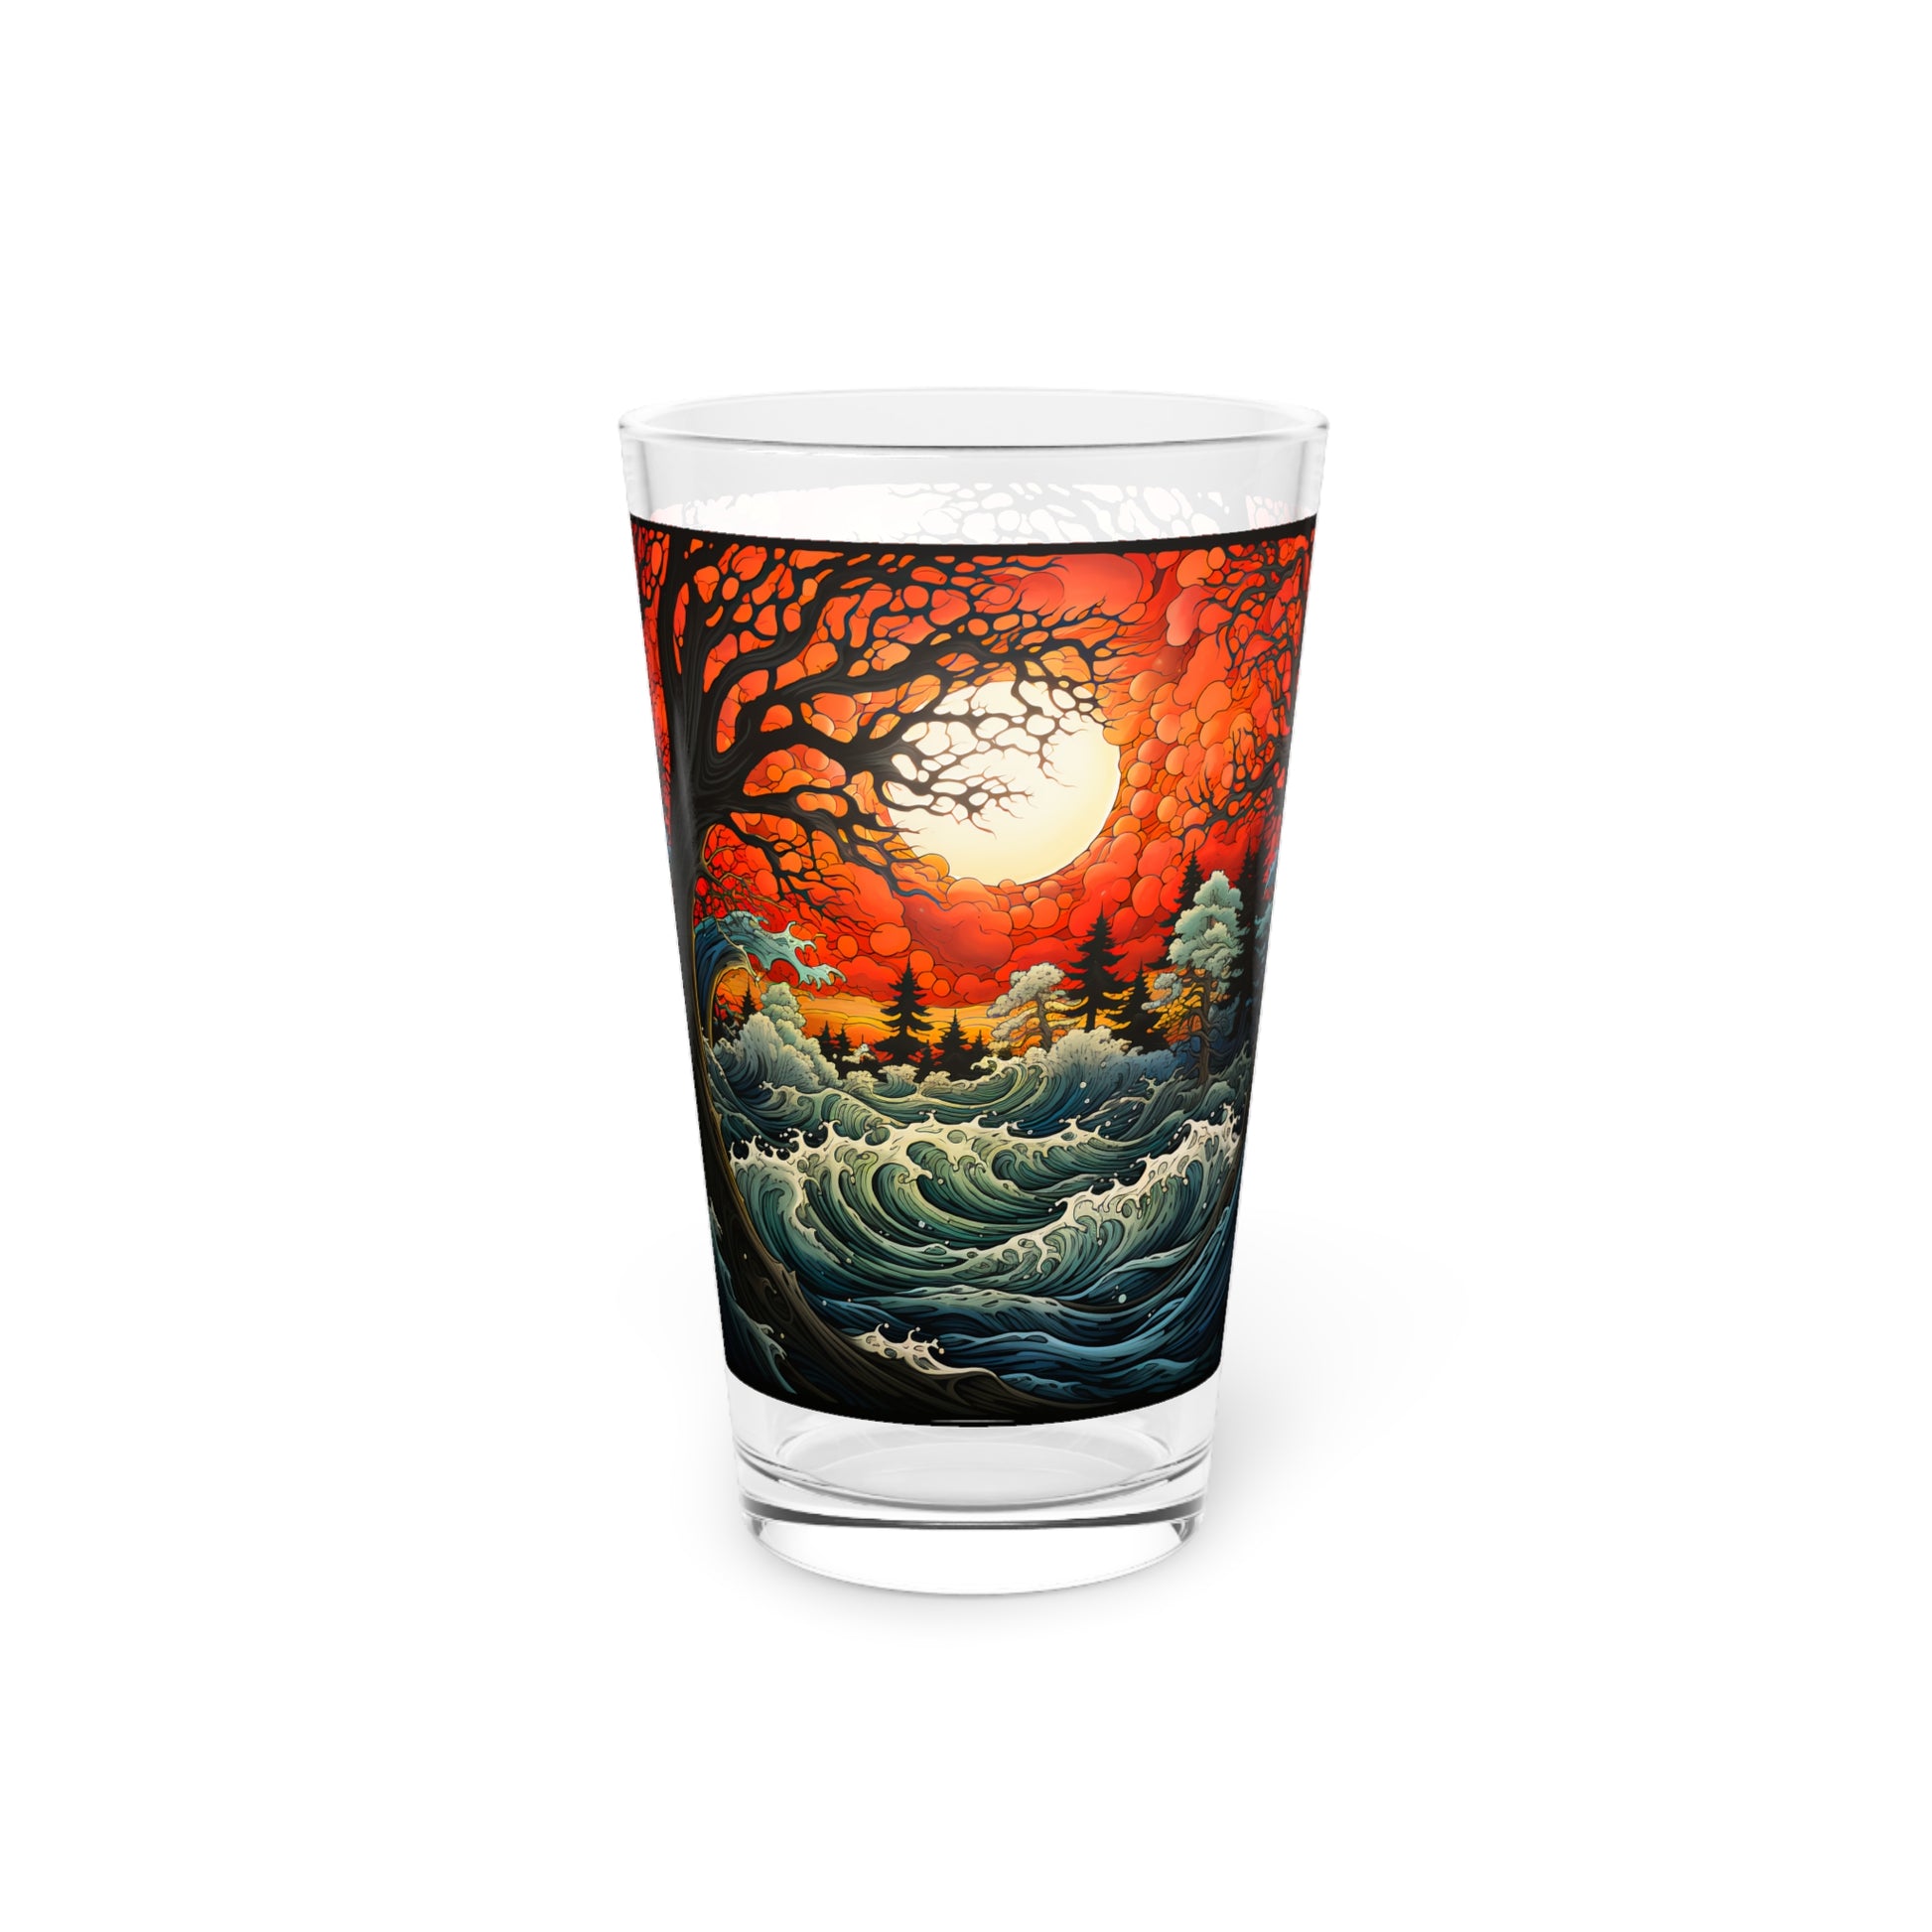 Chase Shadows with Every Sip: Scary Sunset Night Beach 16oz Pint Glass - Waves Design #058. Hauntingly beautiful, exclusively at Stashbox.ai.